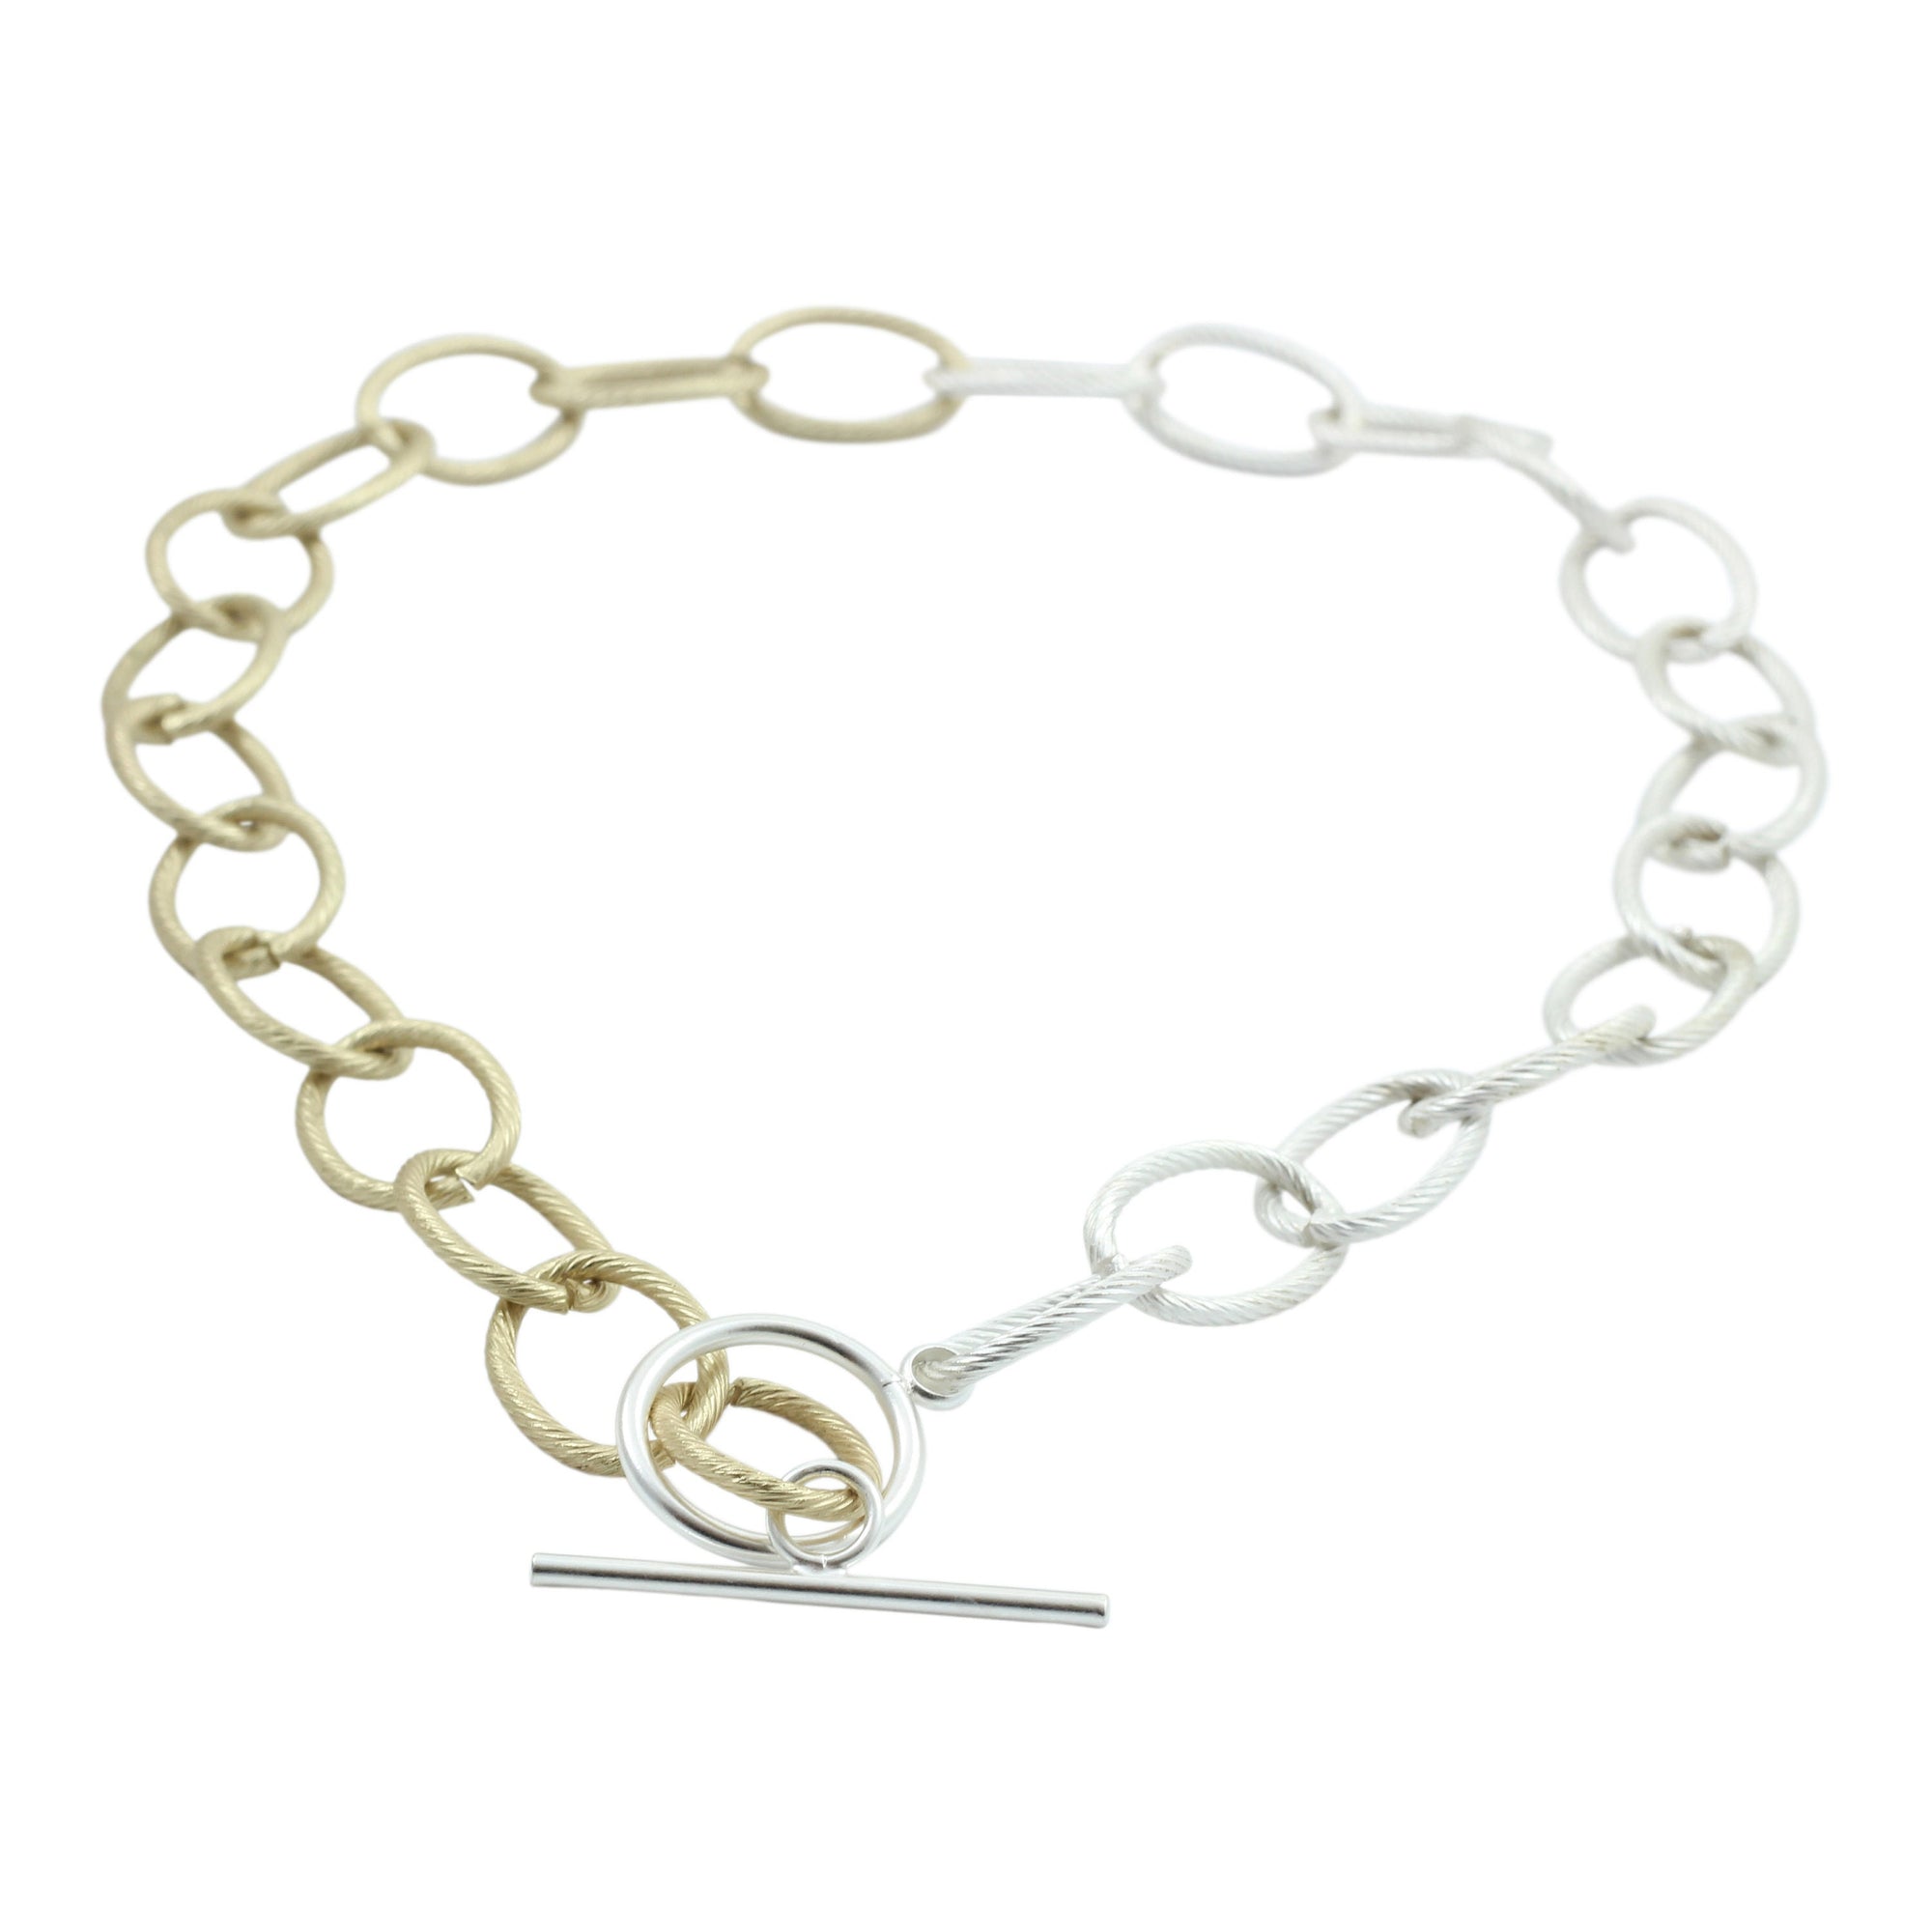 "L'Or" Gold and Silver Mixed Metal Chunky Choker Chain Necklace